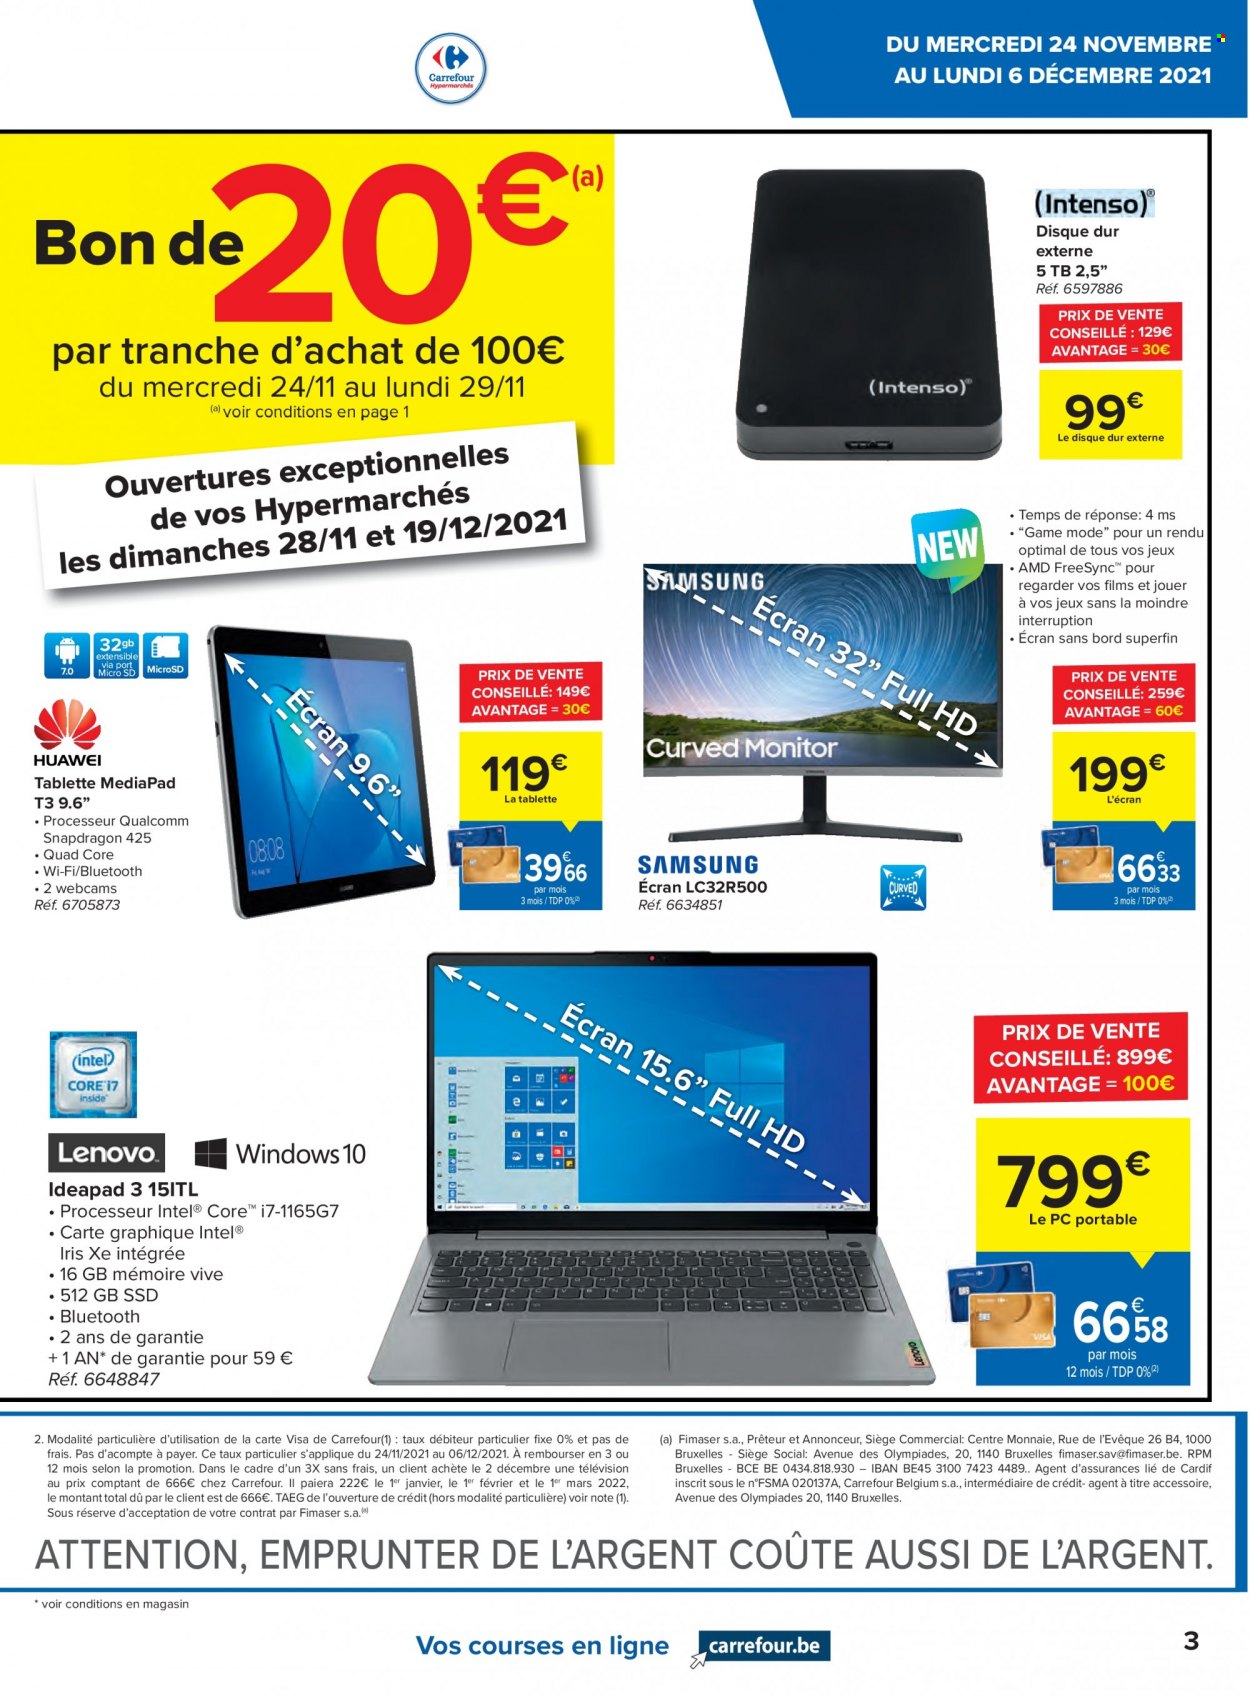 Catalogue Carrefour hypermarkt - 24.11.2021 - 6.12.2021. Page 3.